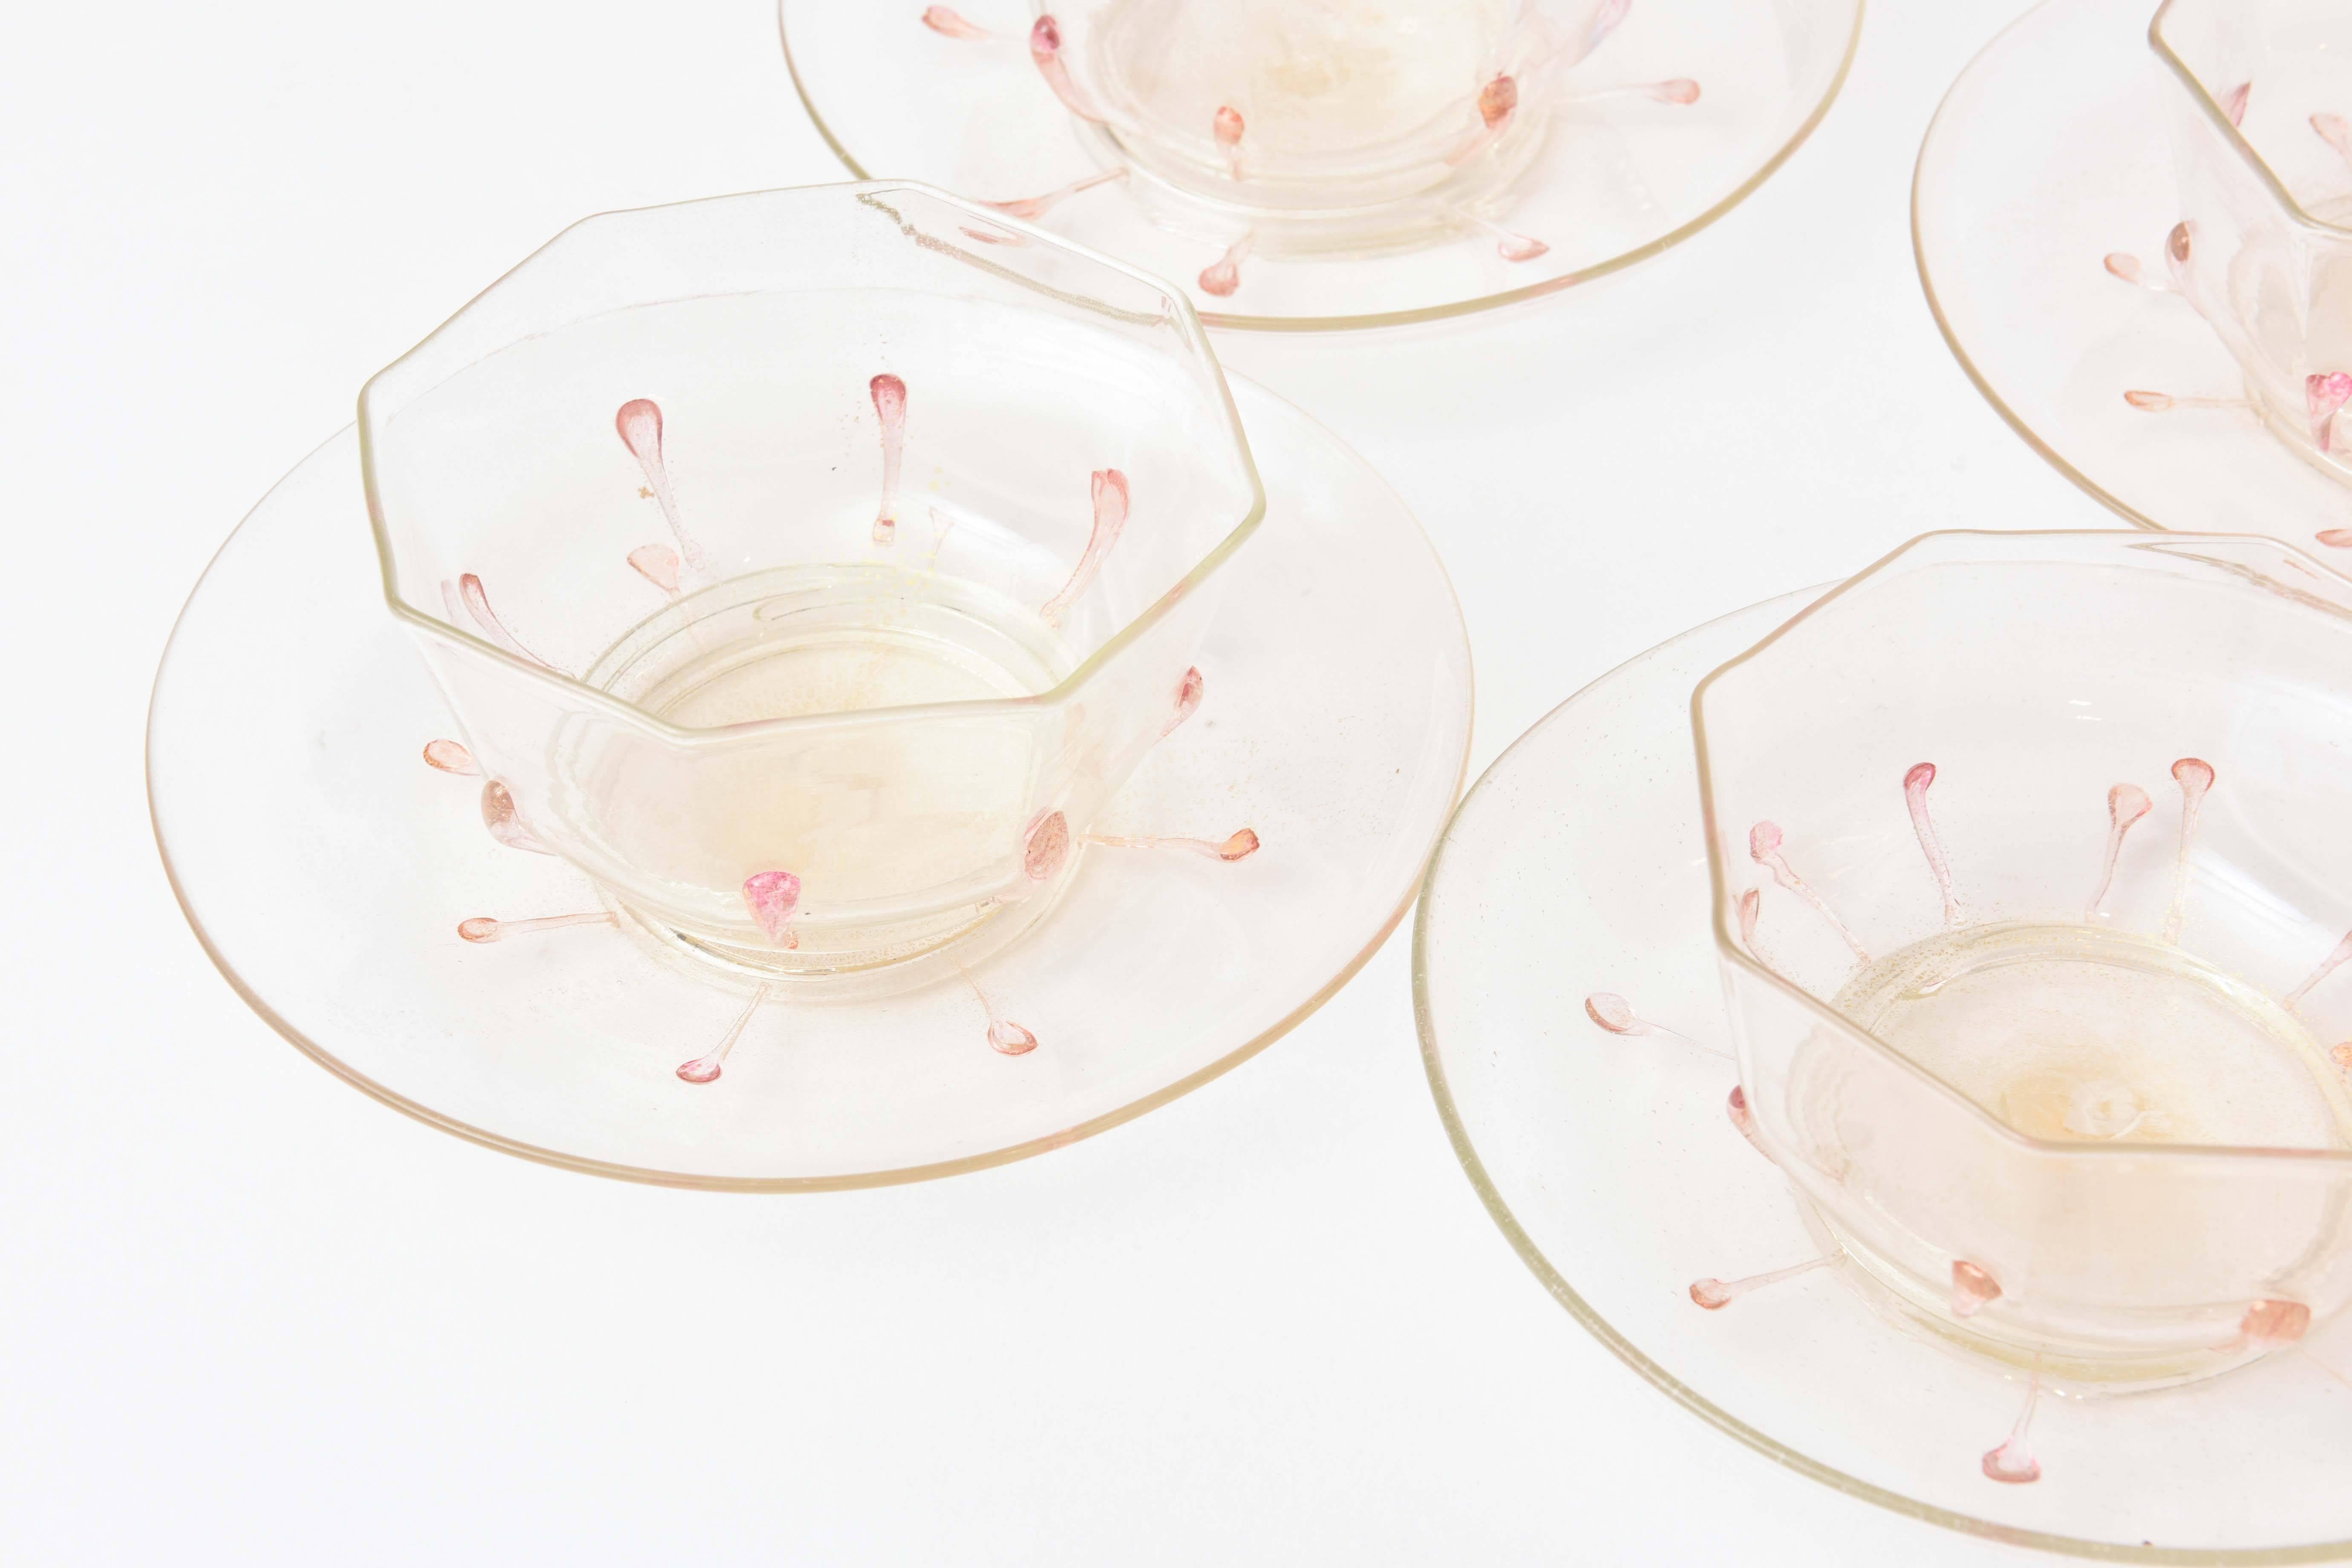 Hand-Crafted Antique Set of 12 Venetian Glass Bowls, Plates in Pretty Pink and Gold 24 Pieces